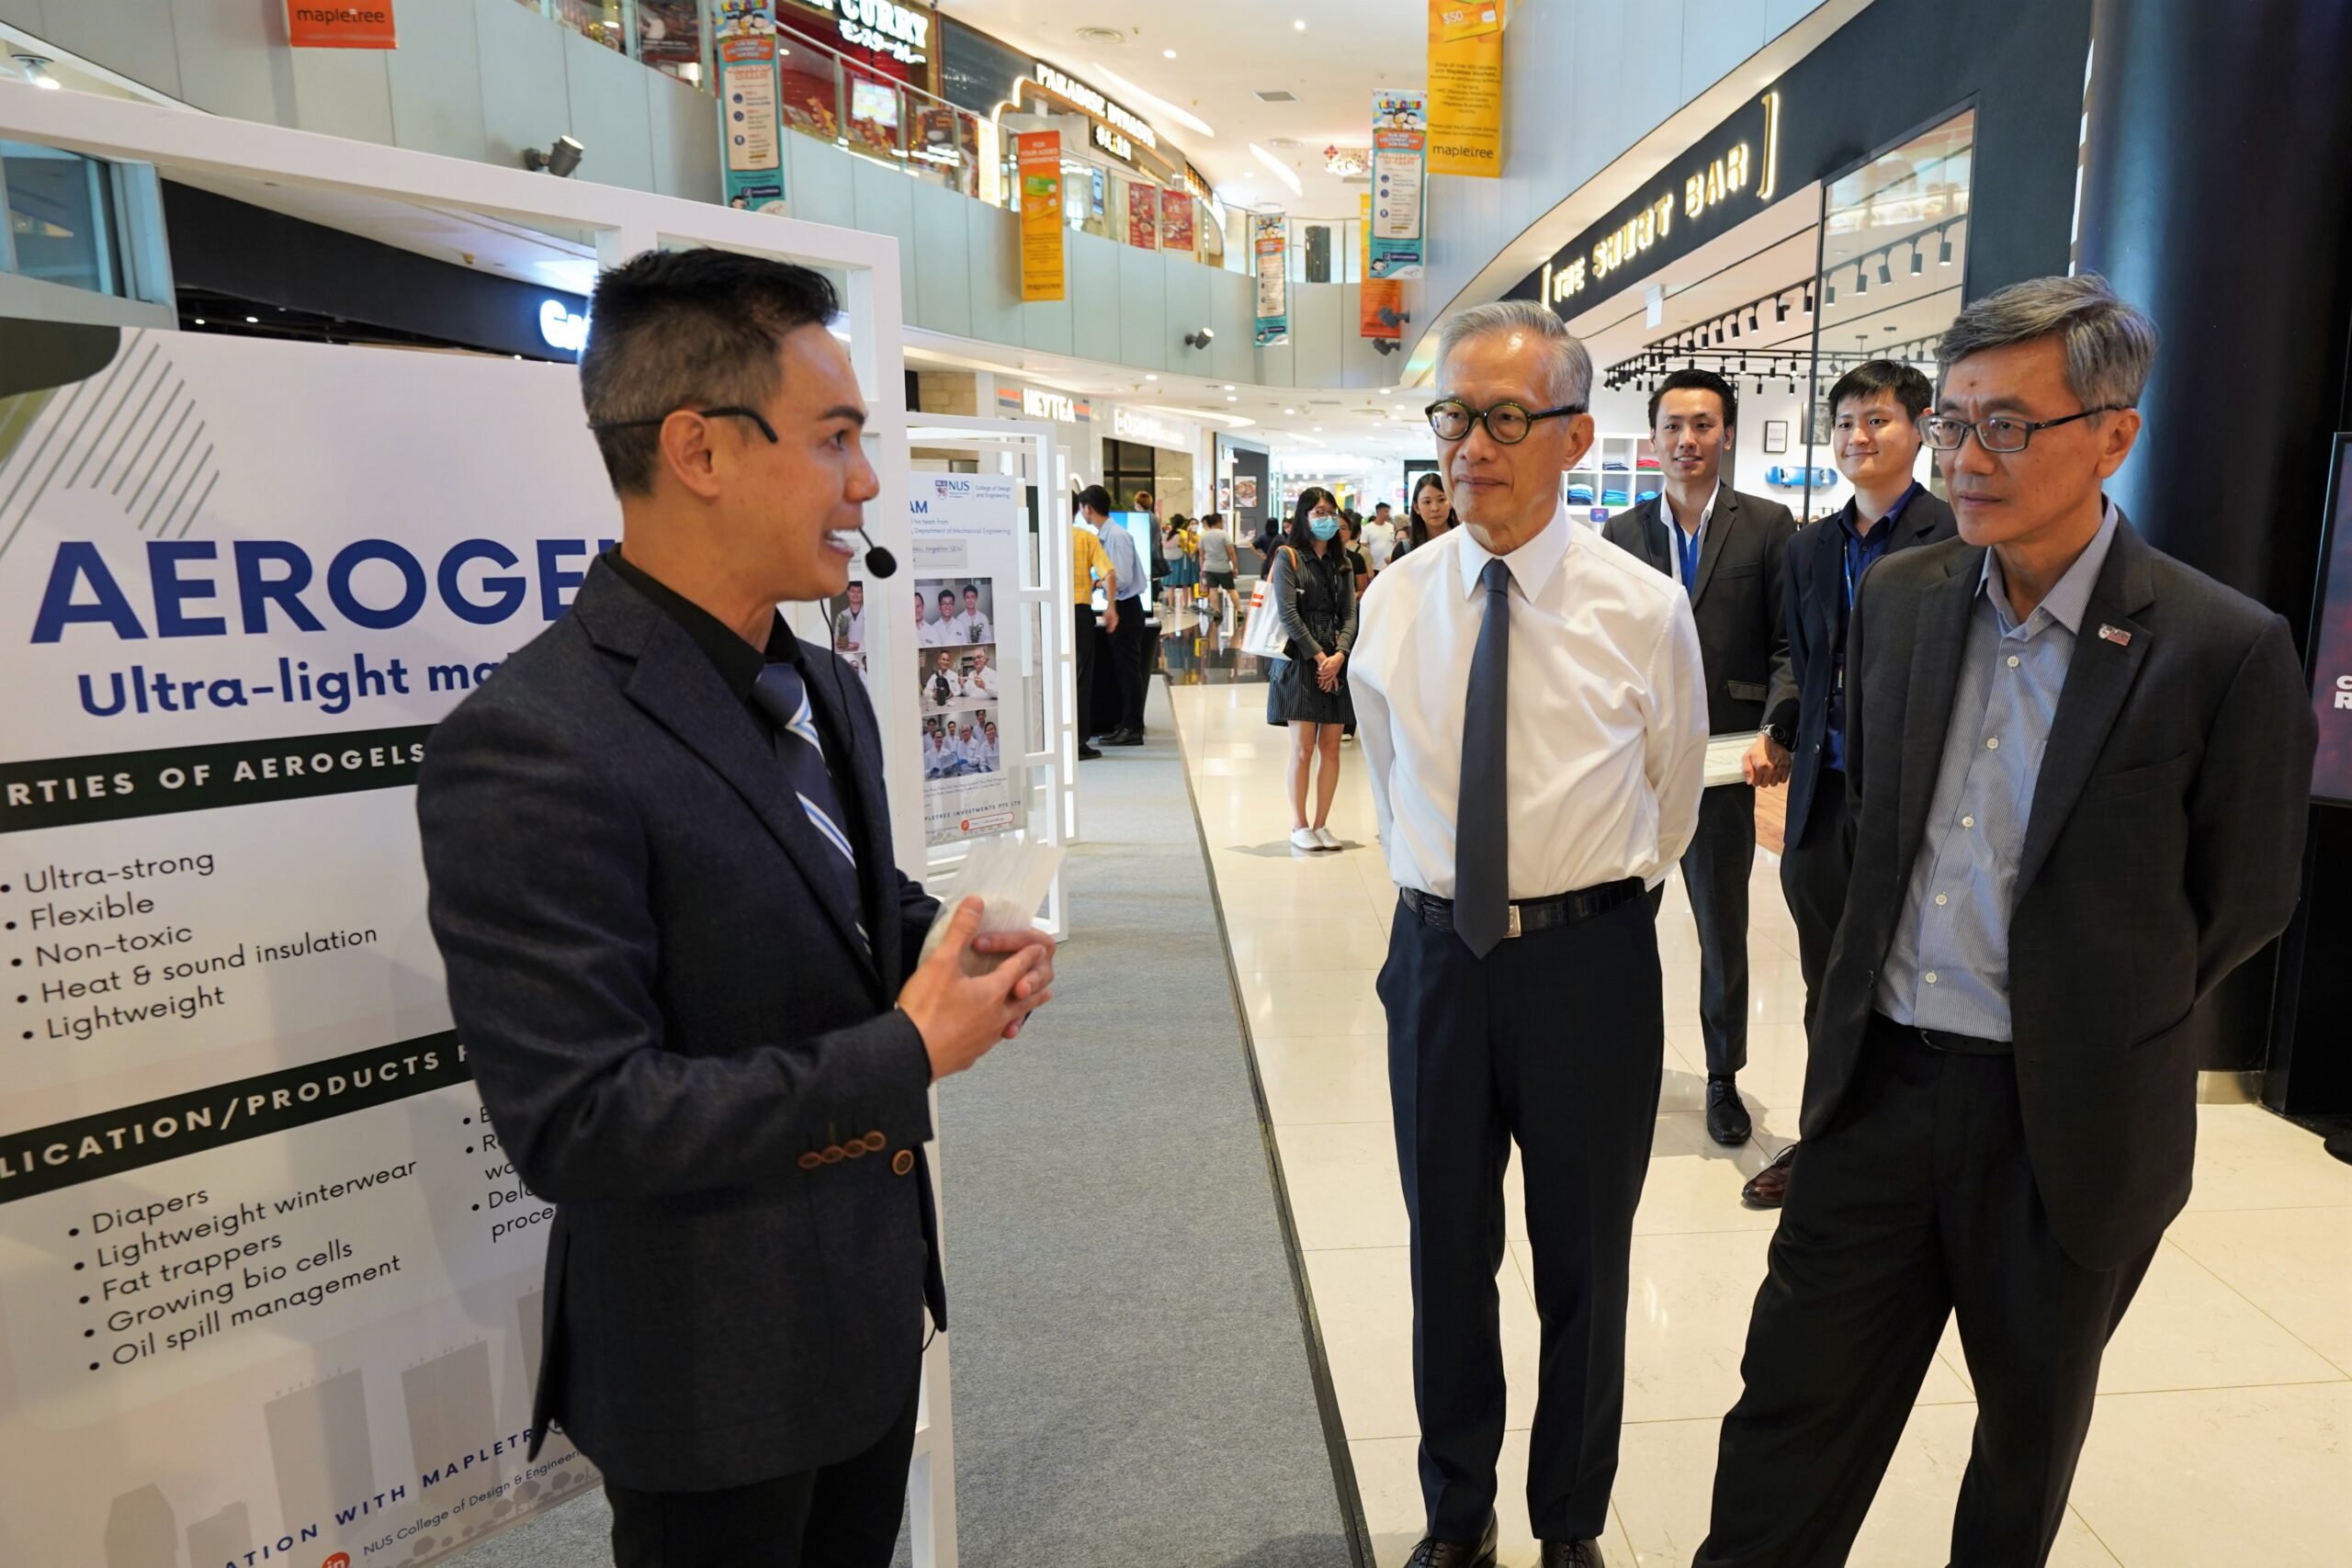 Assoc Prof Duong Hai Minh (left), lead researcher behind the aerogels, introduces the exhibits to Mr Edmund Cheng (centre) Chairman of Mapletree, and Prof Tan Eng Chye (right), NUS President.